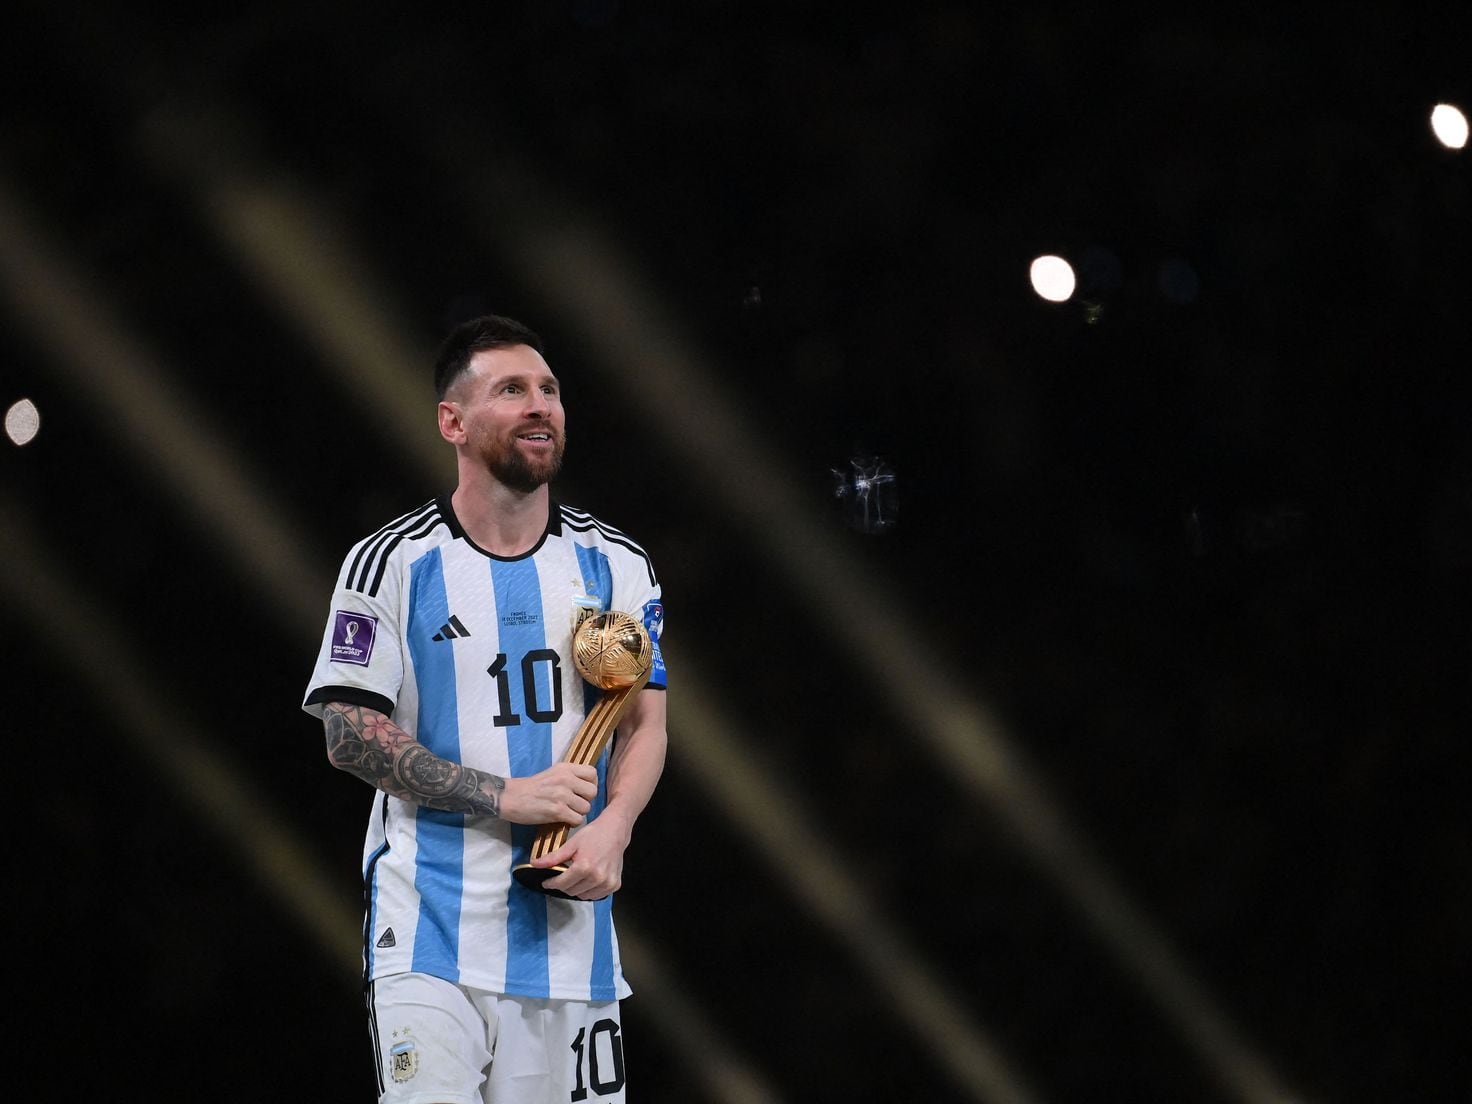 Argentina World Cup shirt sold-out worldwide: Adidas say 3 star